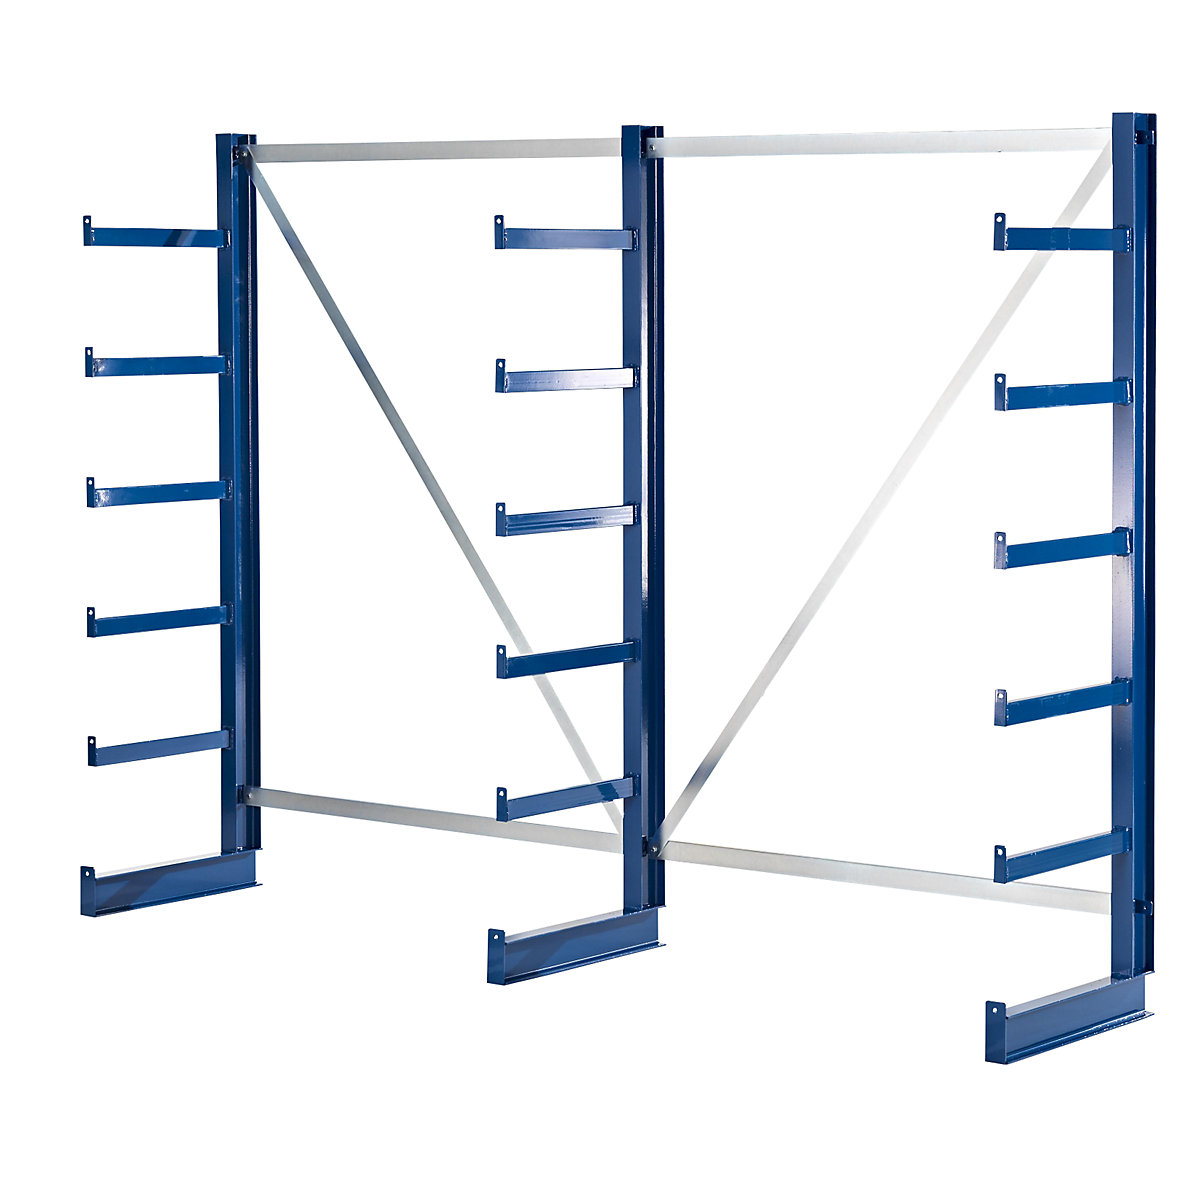 Cantilever racking unit with identical cantilever arm length – eurokraft pro